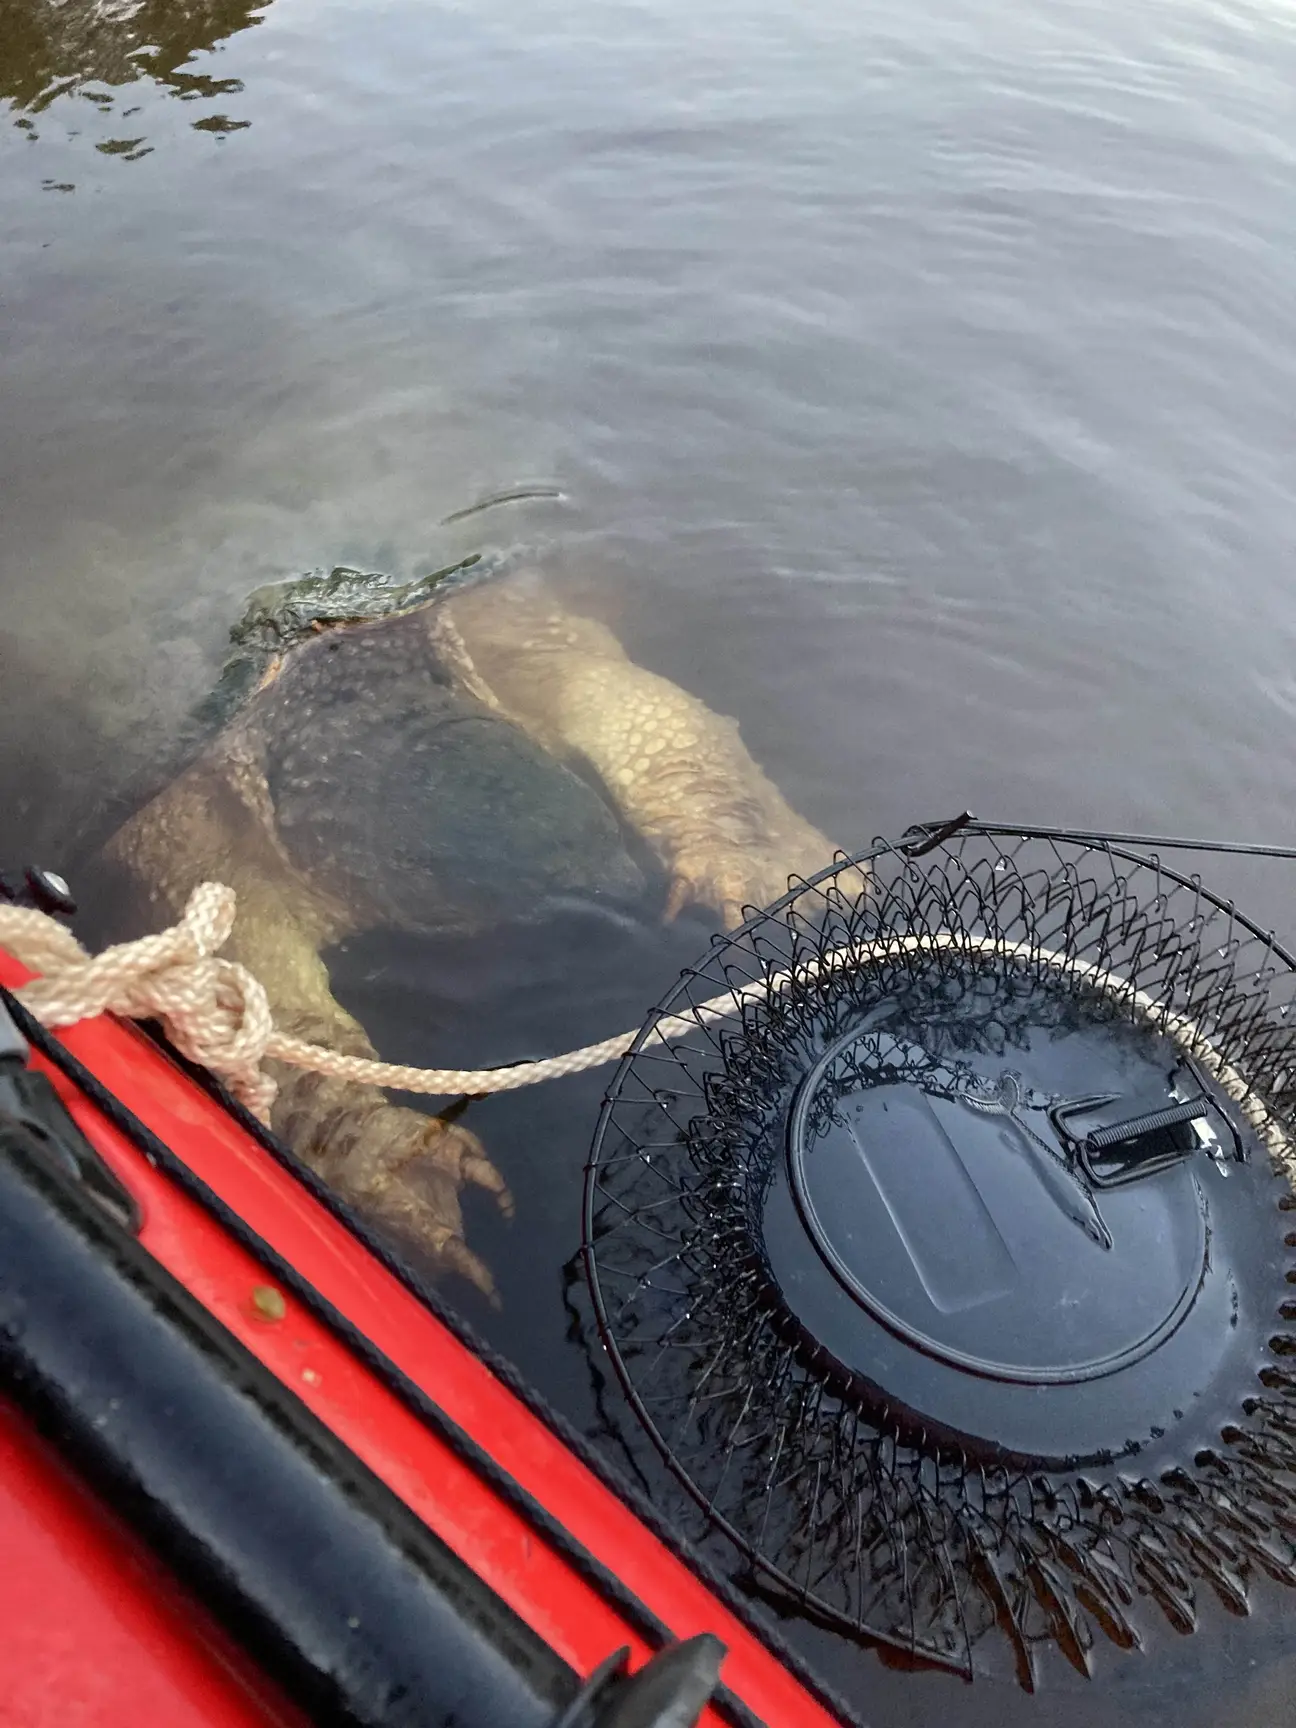 While they were quietly fishing from their kayak, a massive creature suddenly surfaced, leaving them both terrified.